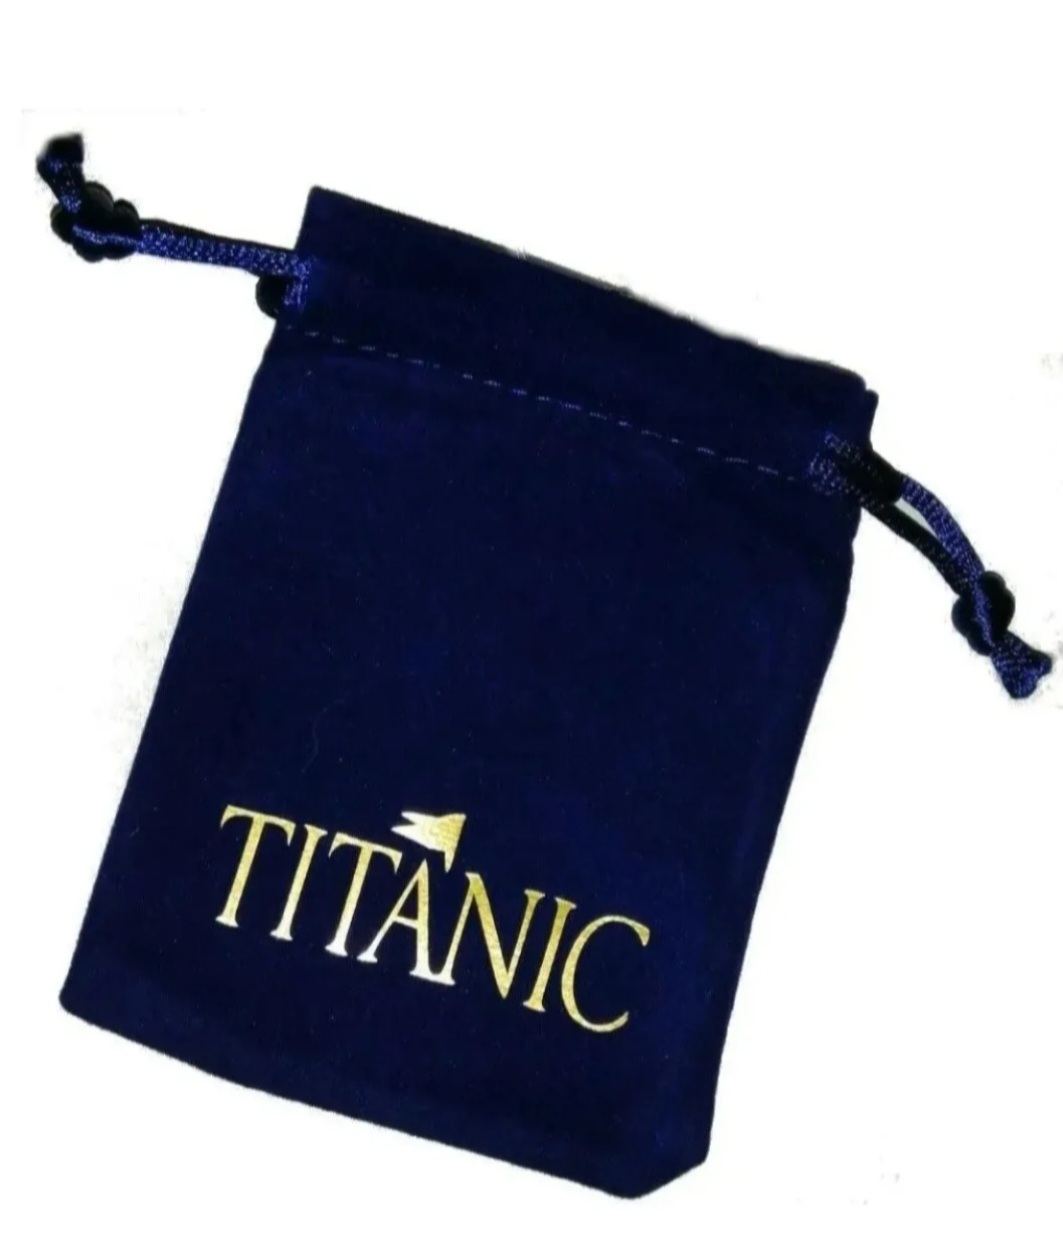 Lot 11 Titanic Heart of The Ocean Pendant Necklace and Velvet Pouch - Image 3 of 3